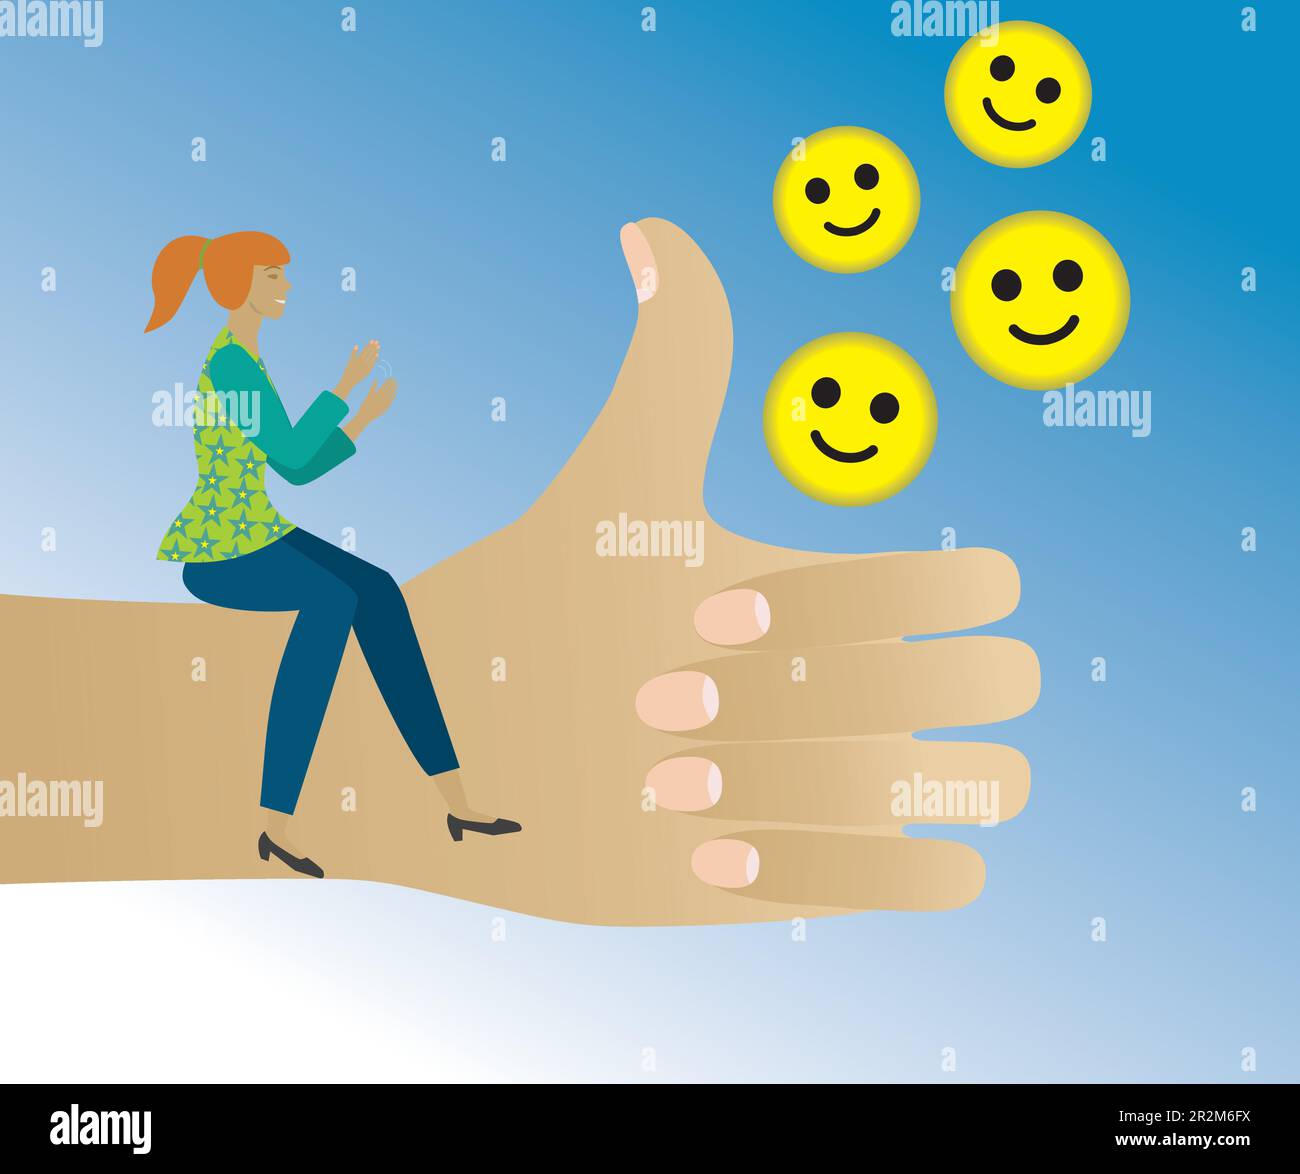 Woman sitting on hand with thumbs up, applauding and sending yellow appreciation smileys. Vector illustration. Stock Vector